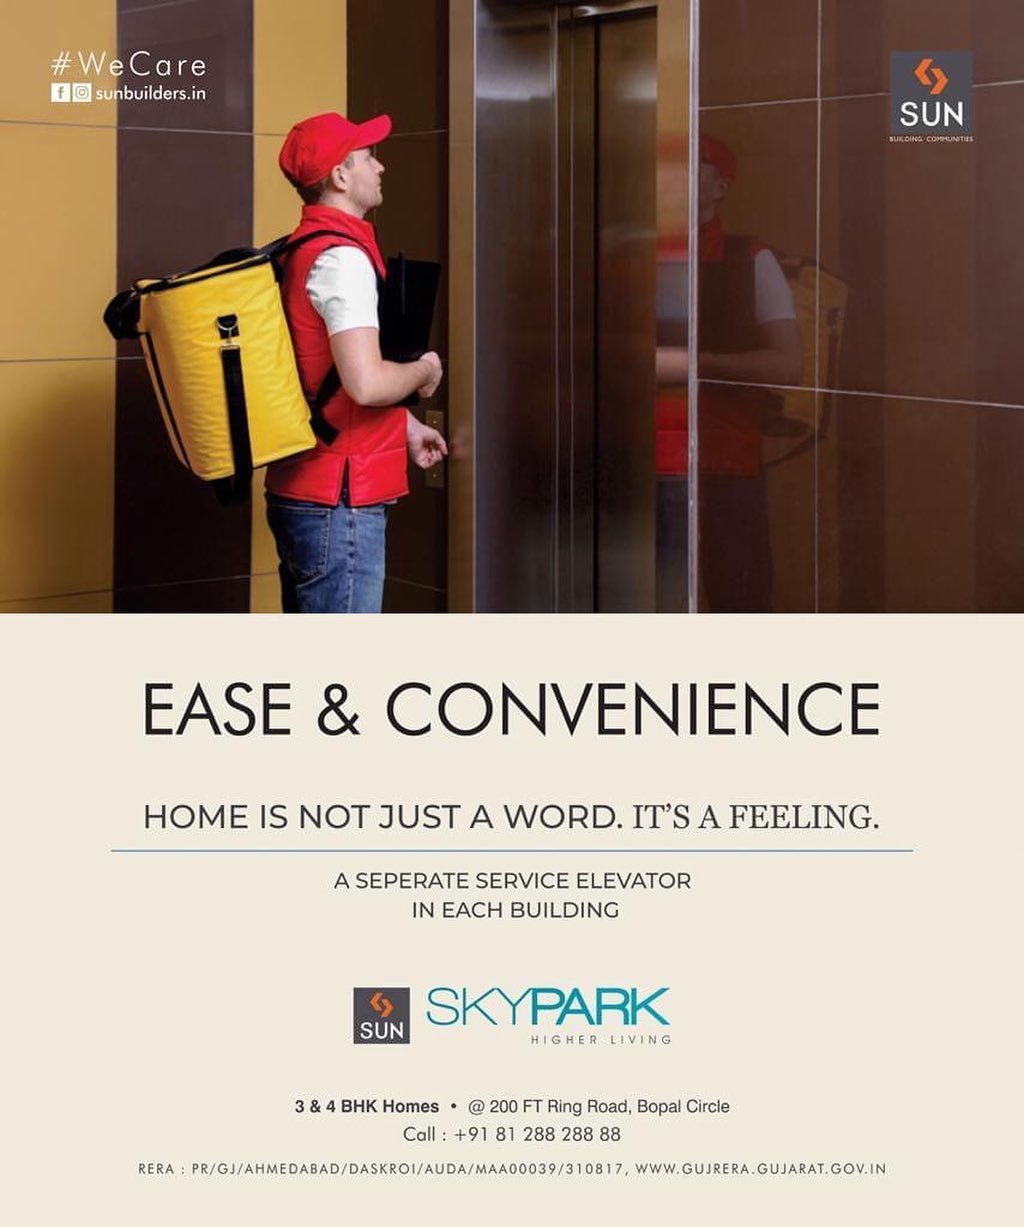 Nearly 4 decades of trust, quality construction, ethical practice and commitment is what you get with Us. 
Sun Sky Park, A 22 Storey Residential Community located at Bopal-Ambli is a new perspective to city Living in Ahmedabad that answers most of your questions through its impeccable quality, smart planning and modern amenities. 
Possession in 2 months!! For Details Call +91 987932058

#residential #bopal #ambli #luxuryhomes #3bhk #4bhk #safeinvestment #qualityconstruction #ethics #realestateahmedabad #sunbuildersgroup #staysafe #wecare